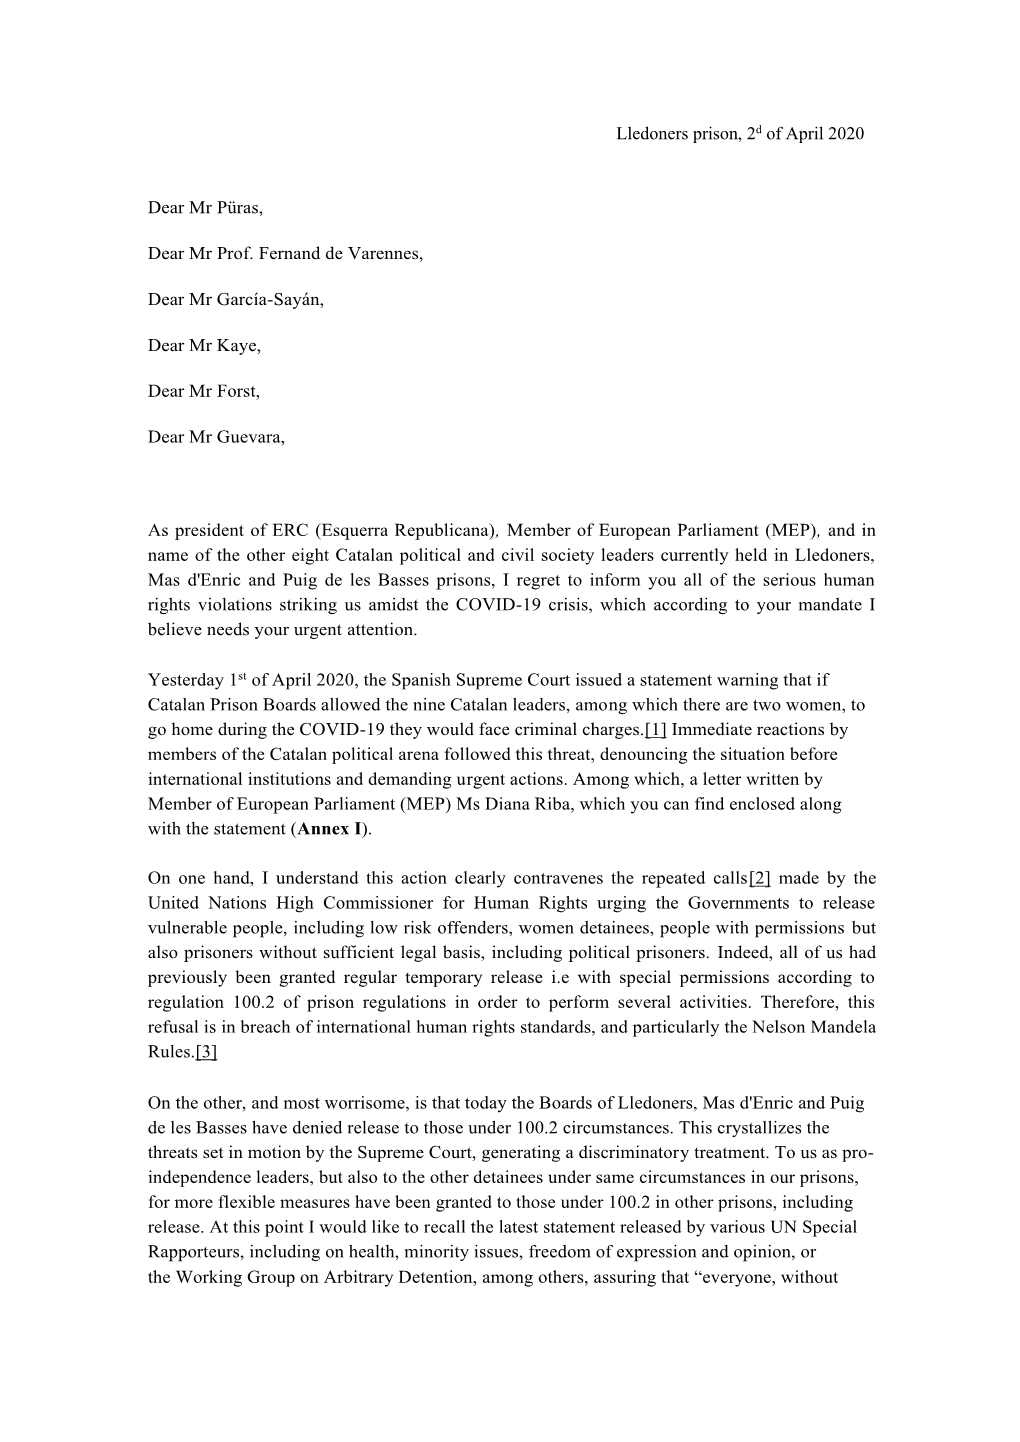 Letter from Oriol Junqueras to The